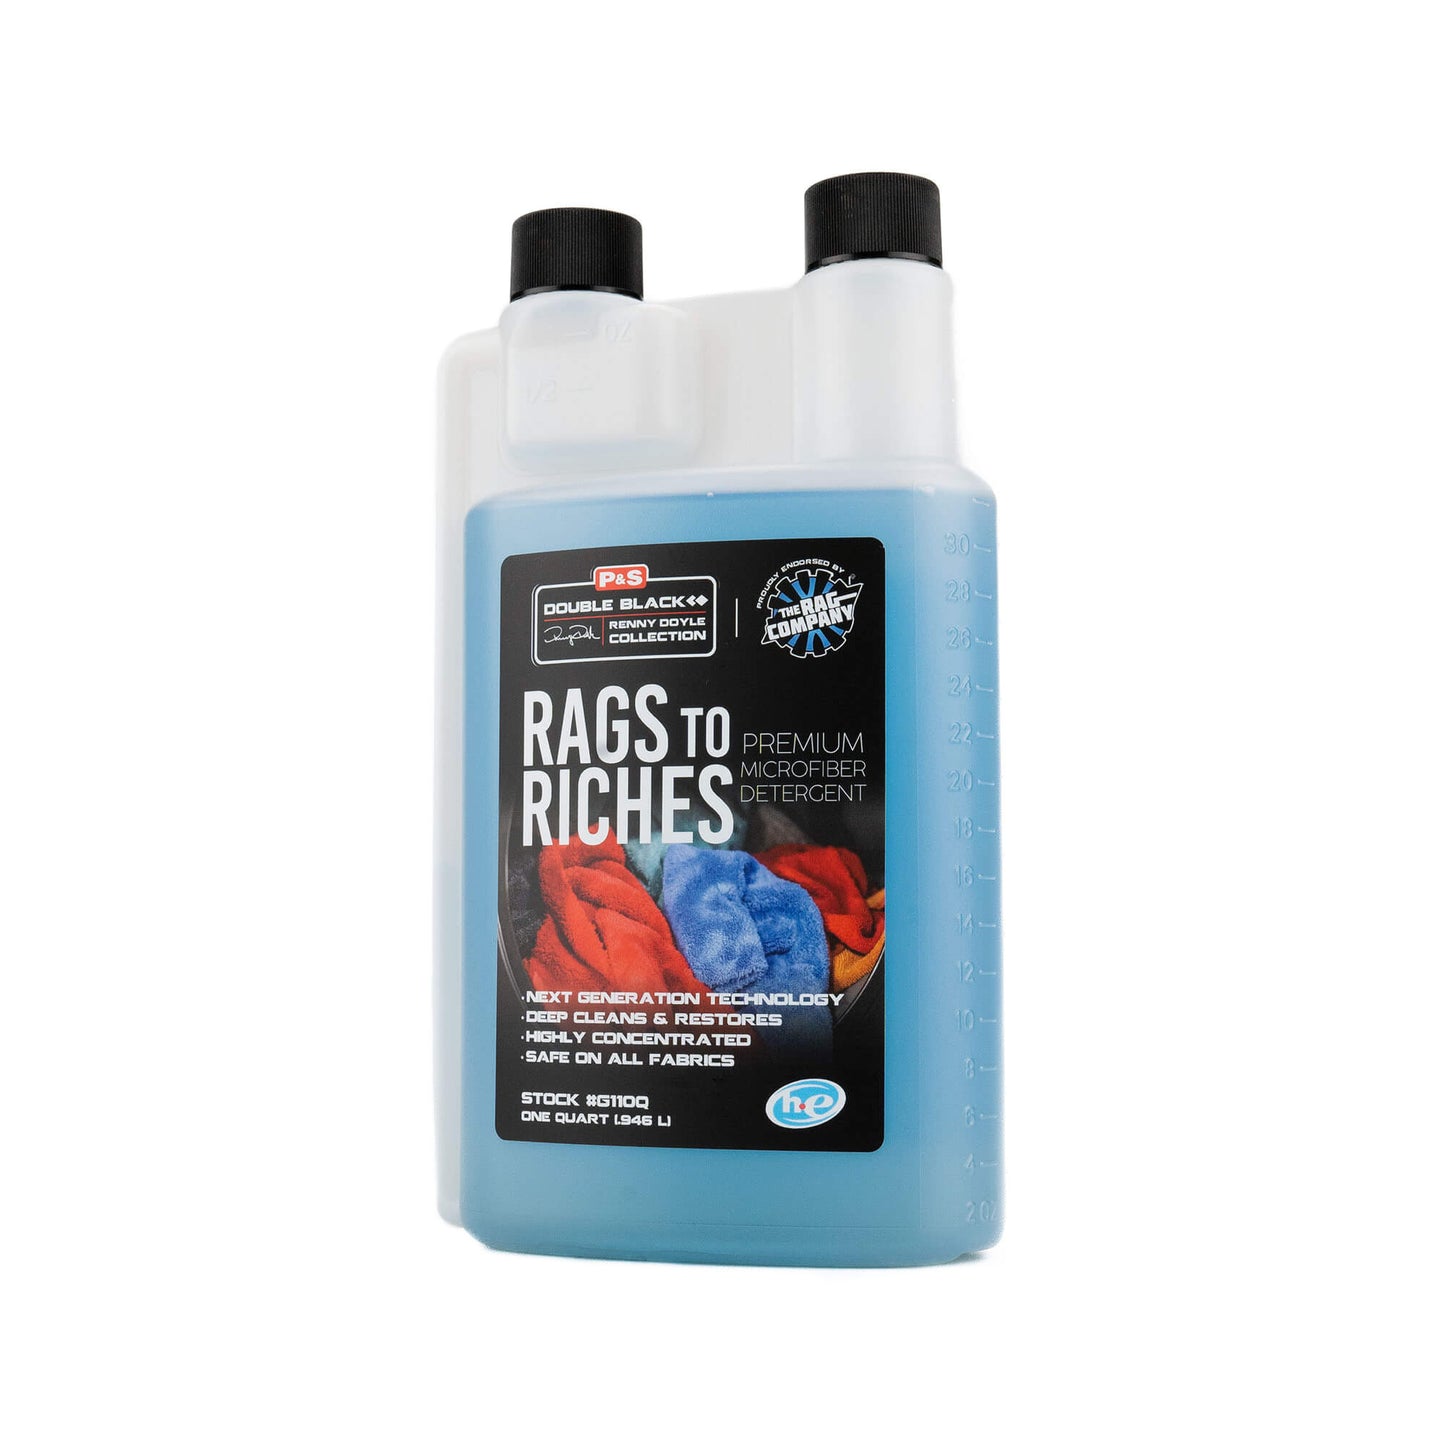 P&S Rags To Riches Microfiber Detergent & cleaner